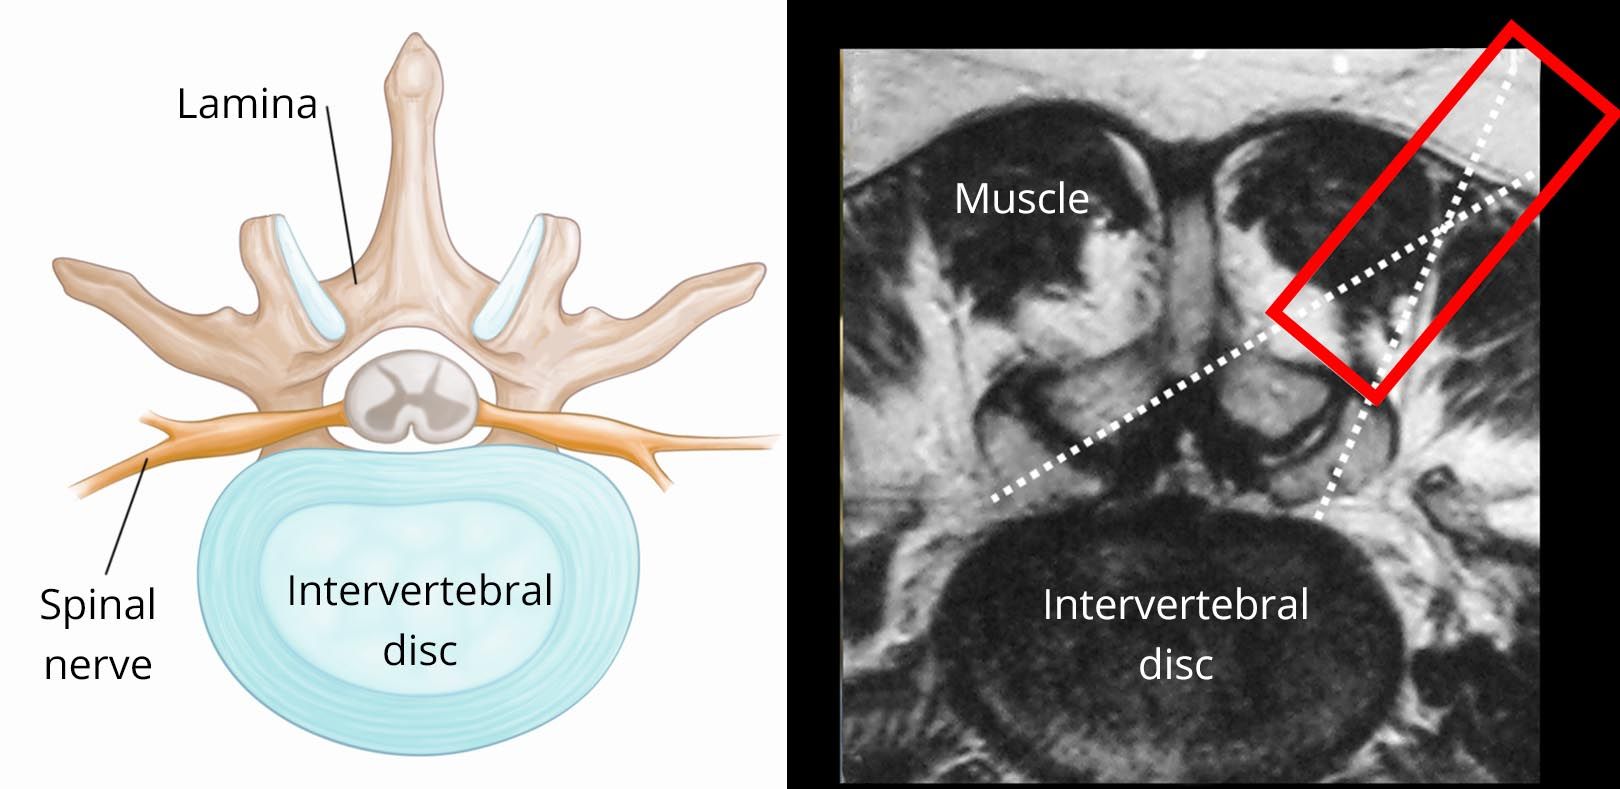 Cross-section view of intervertebral disk and location of tubular retractor